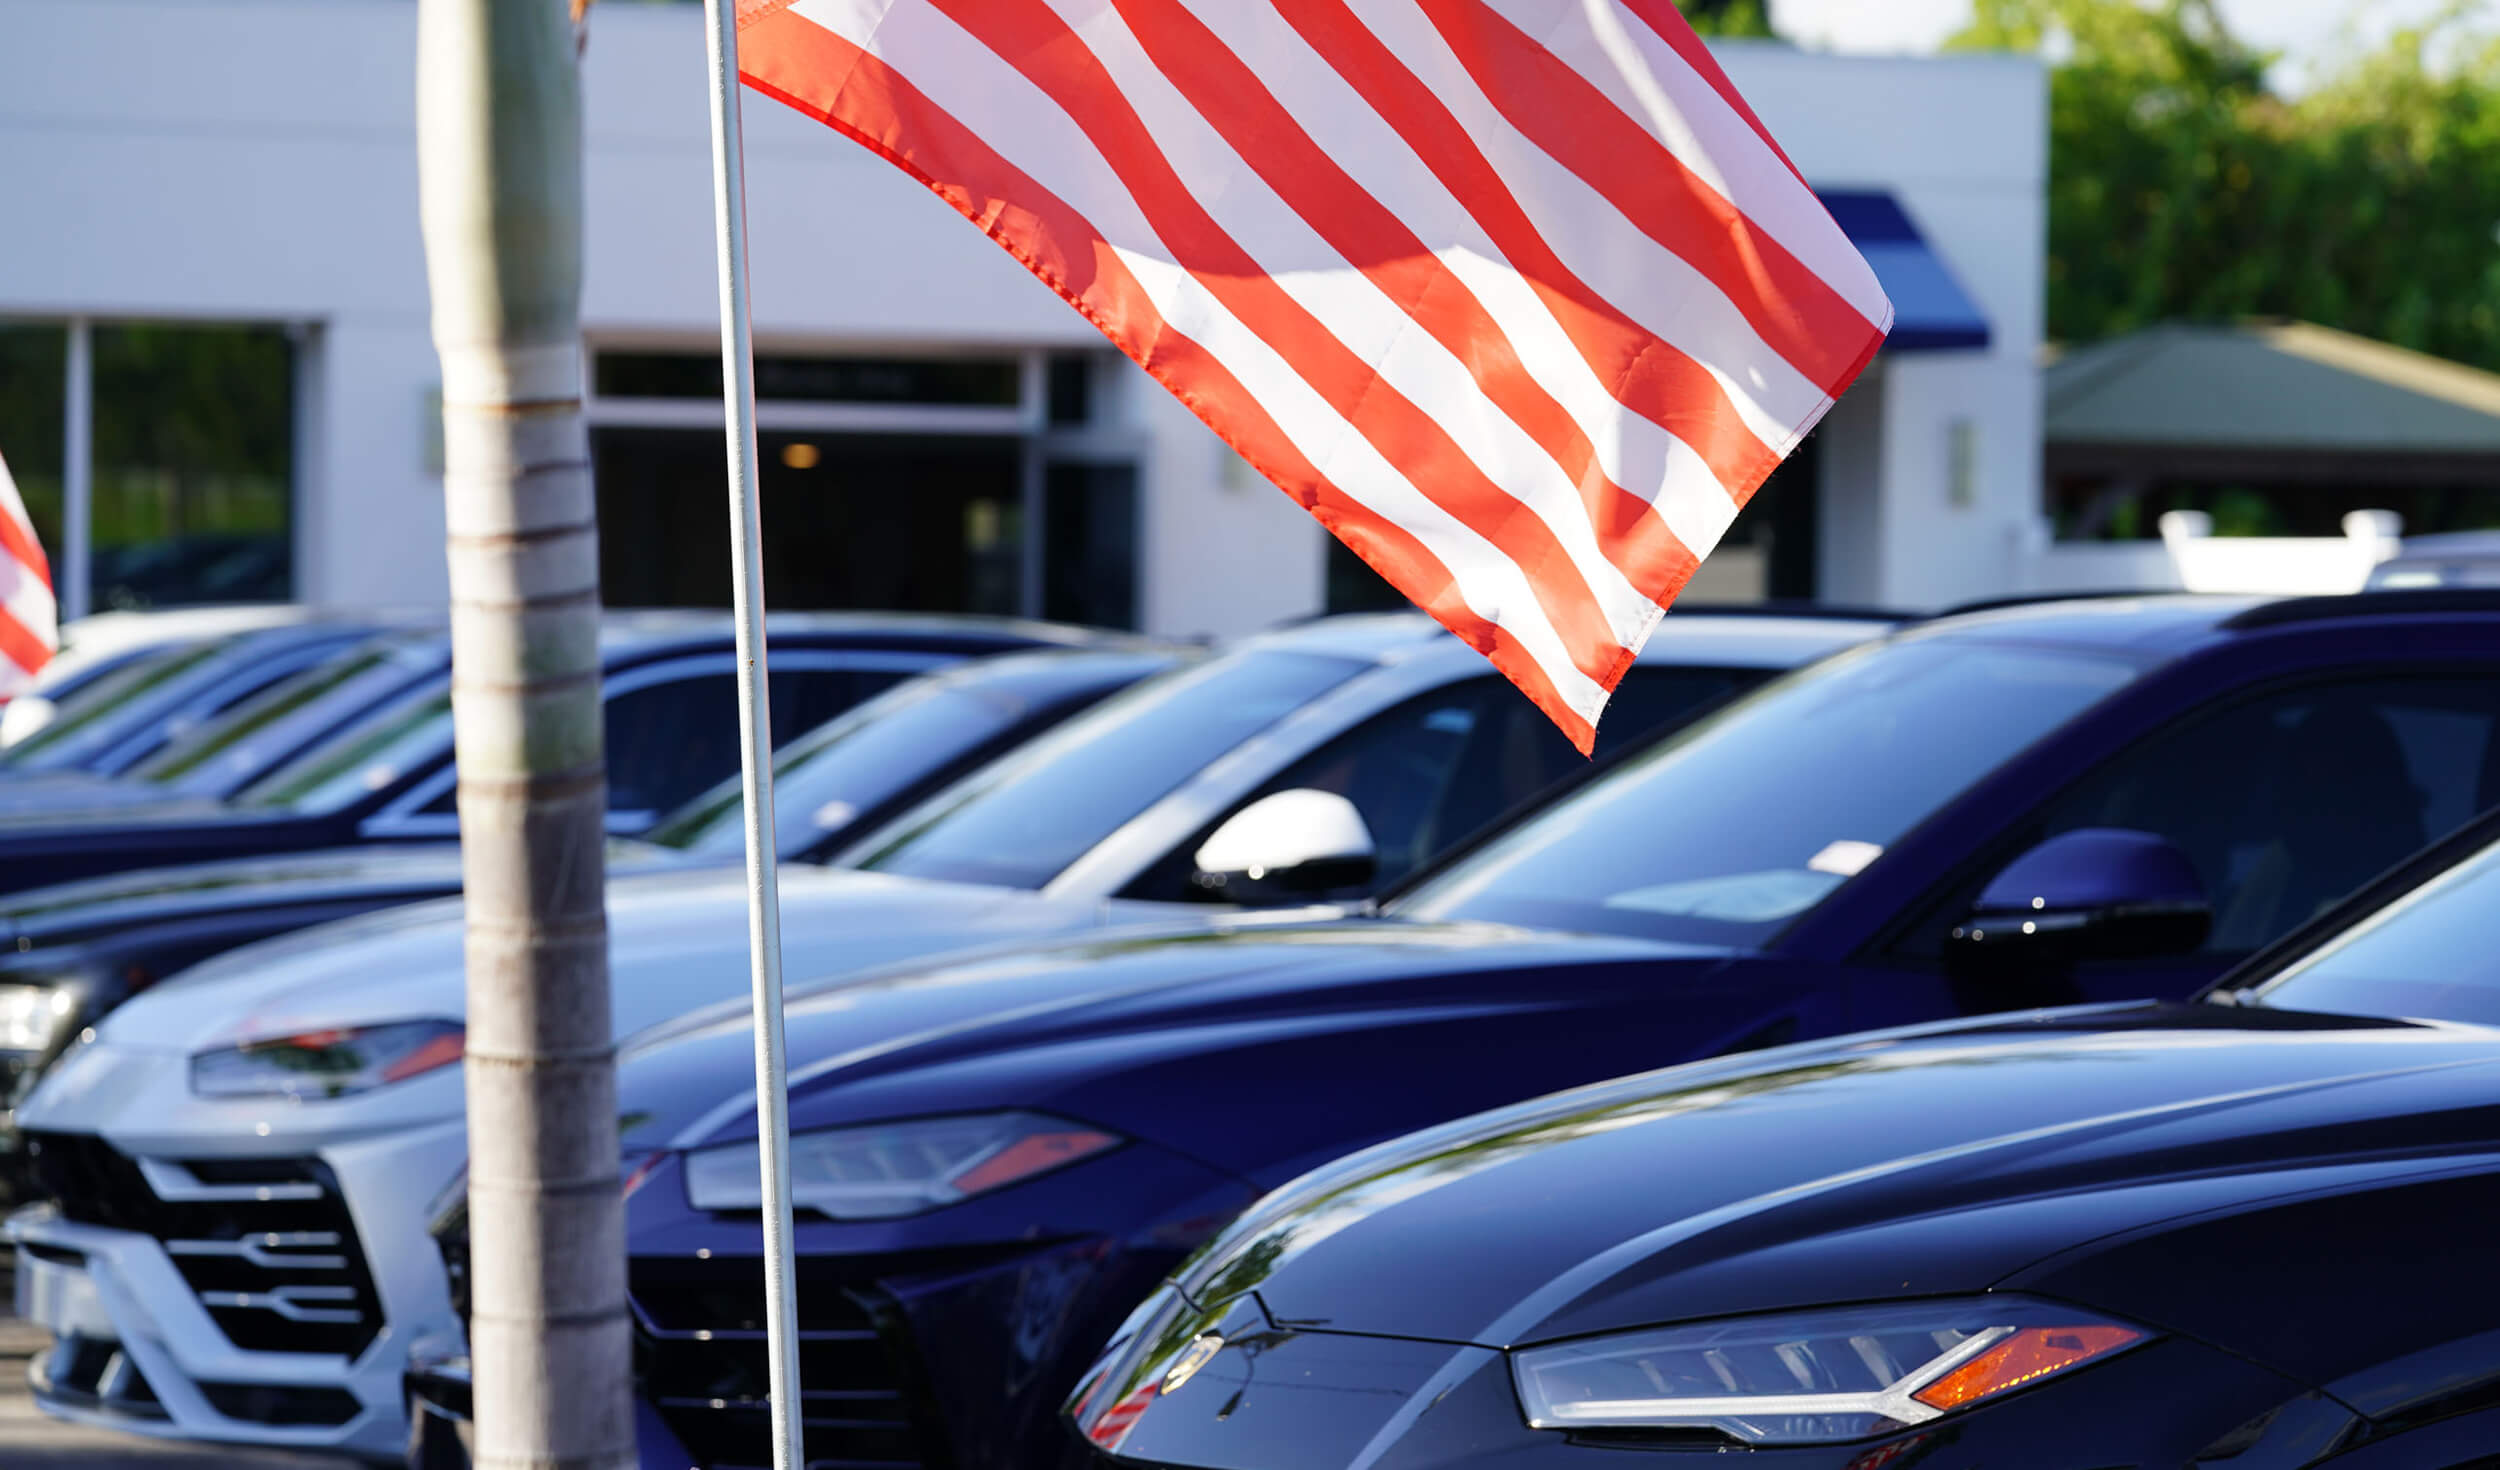 Exterior image of Palm Beach Auto Group dealership: closeup of flag with line of cars as background.